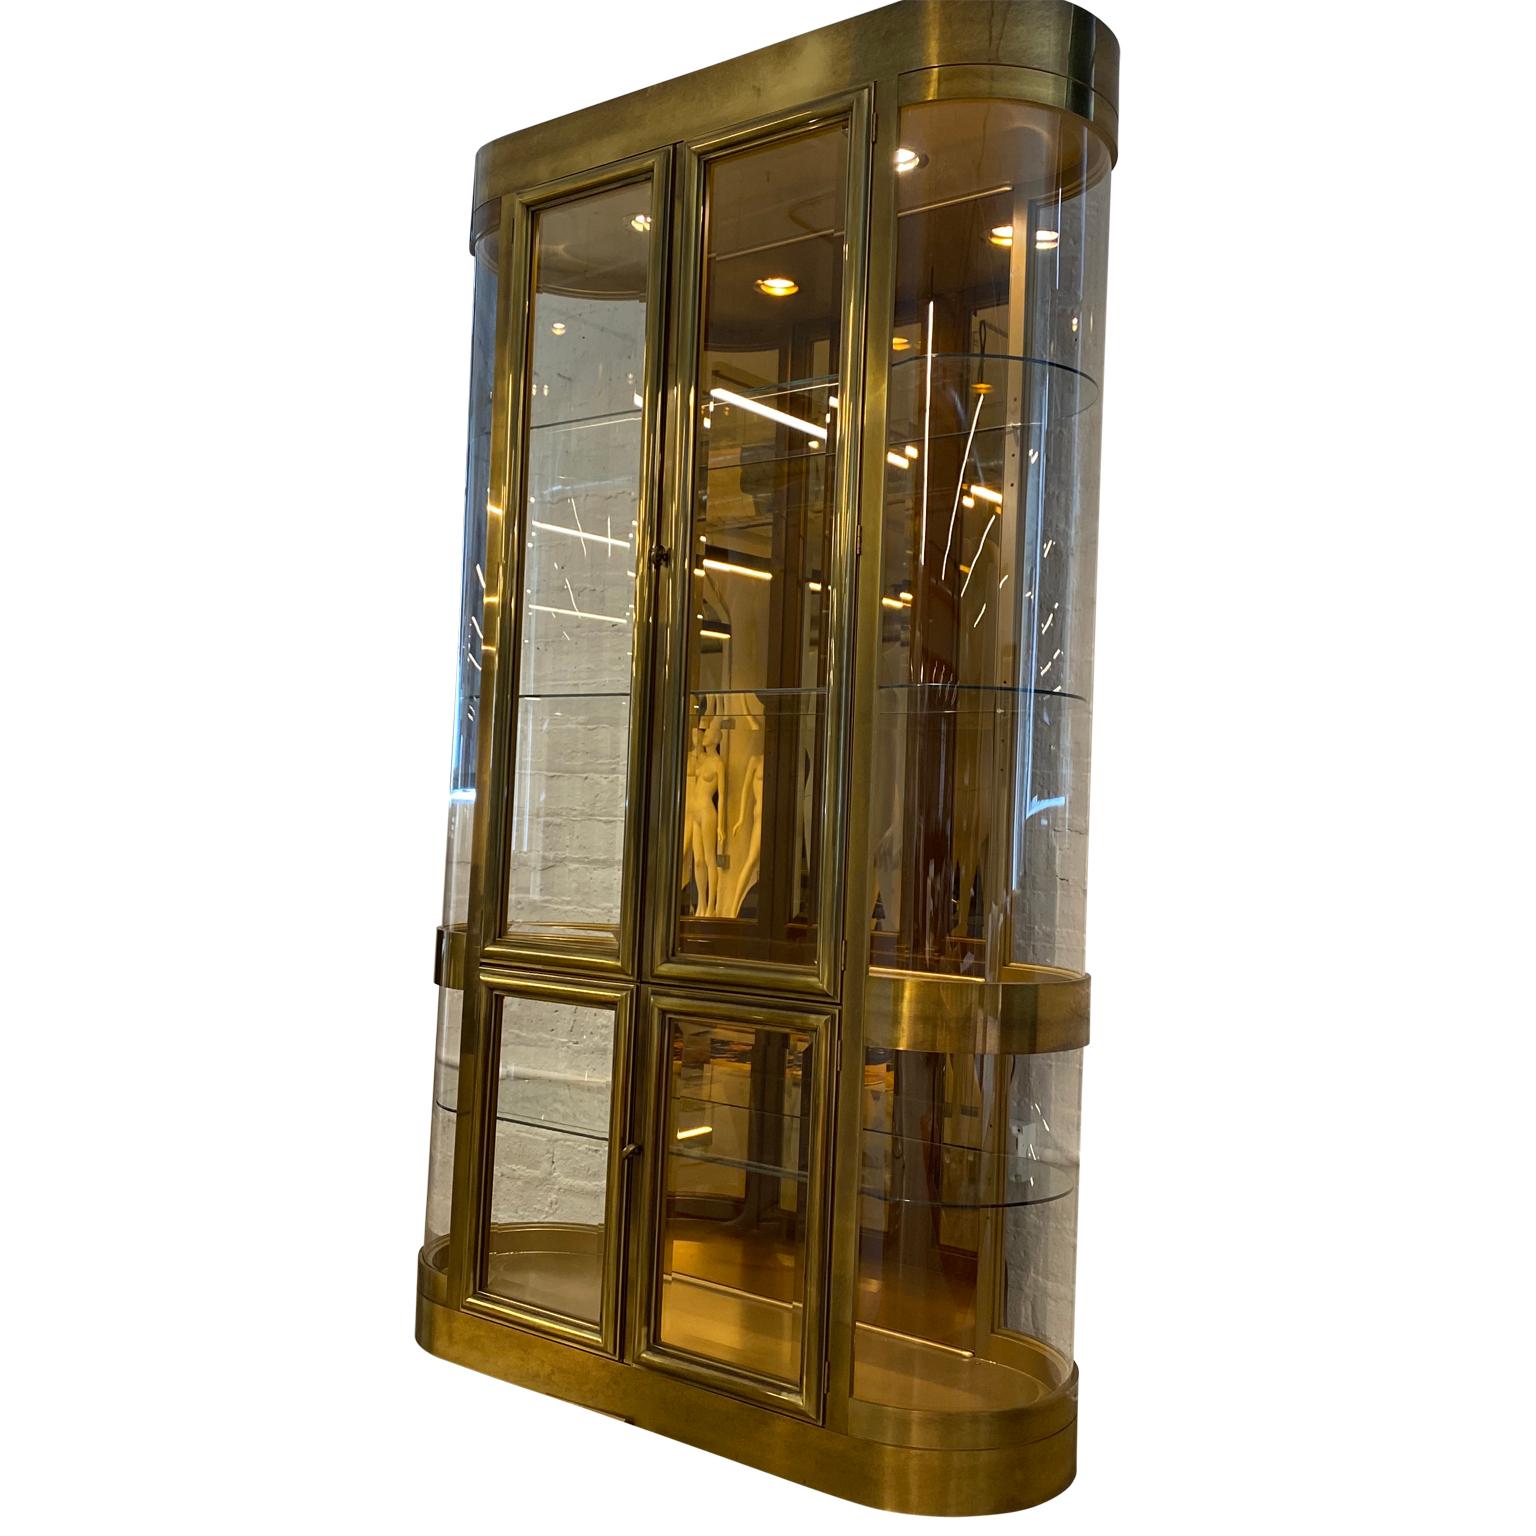 Rare single Mastercraft brass vitrine display cabinet with curved Lucite sides and with mirrored back, glass shelves and locking doors. The glass panels and door have thick bevelled glass.
The vitrine has working display lighting.

The inside